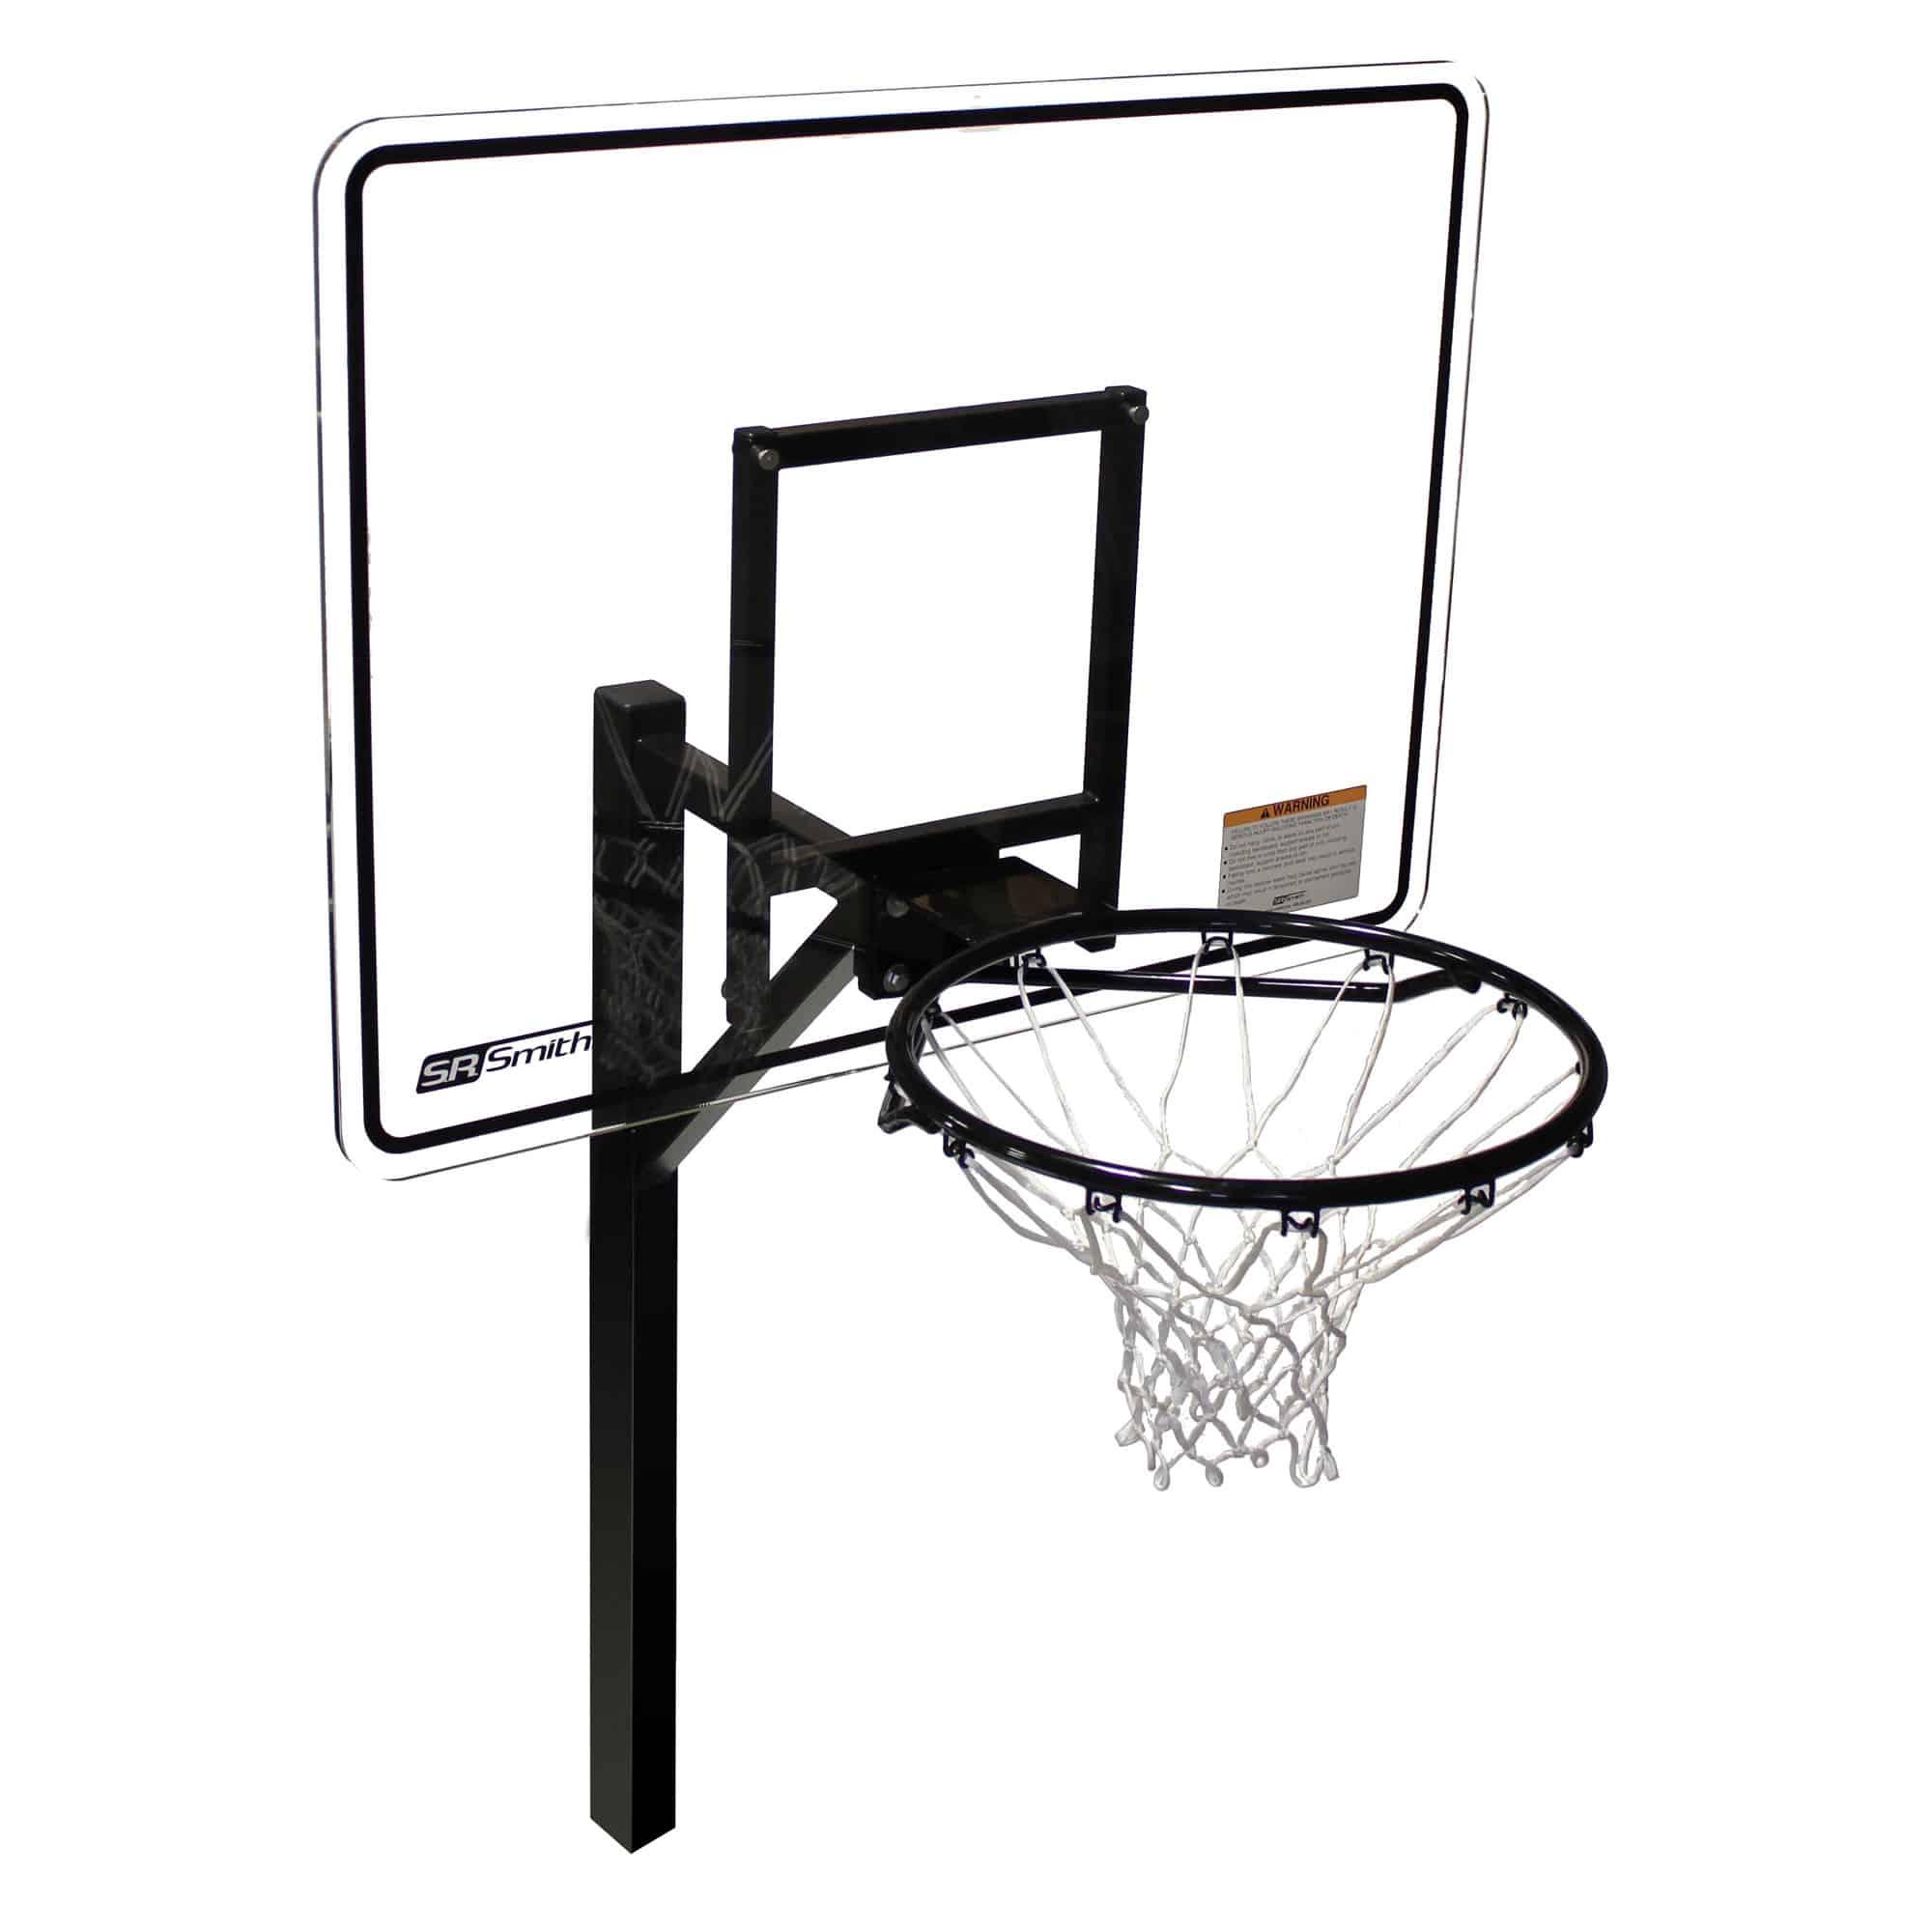 Swim-N-Dunk Commercial RockSolid Basketball Goal With Anchors